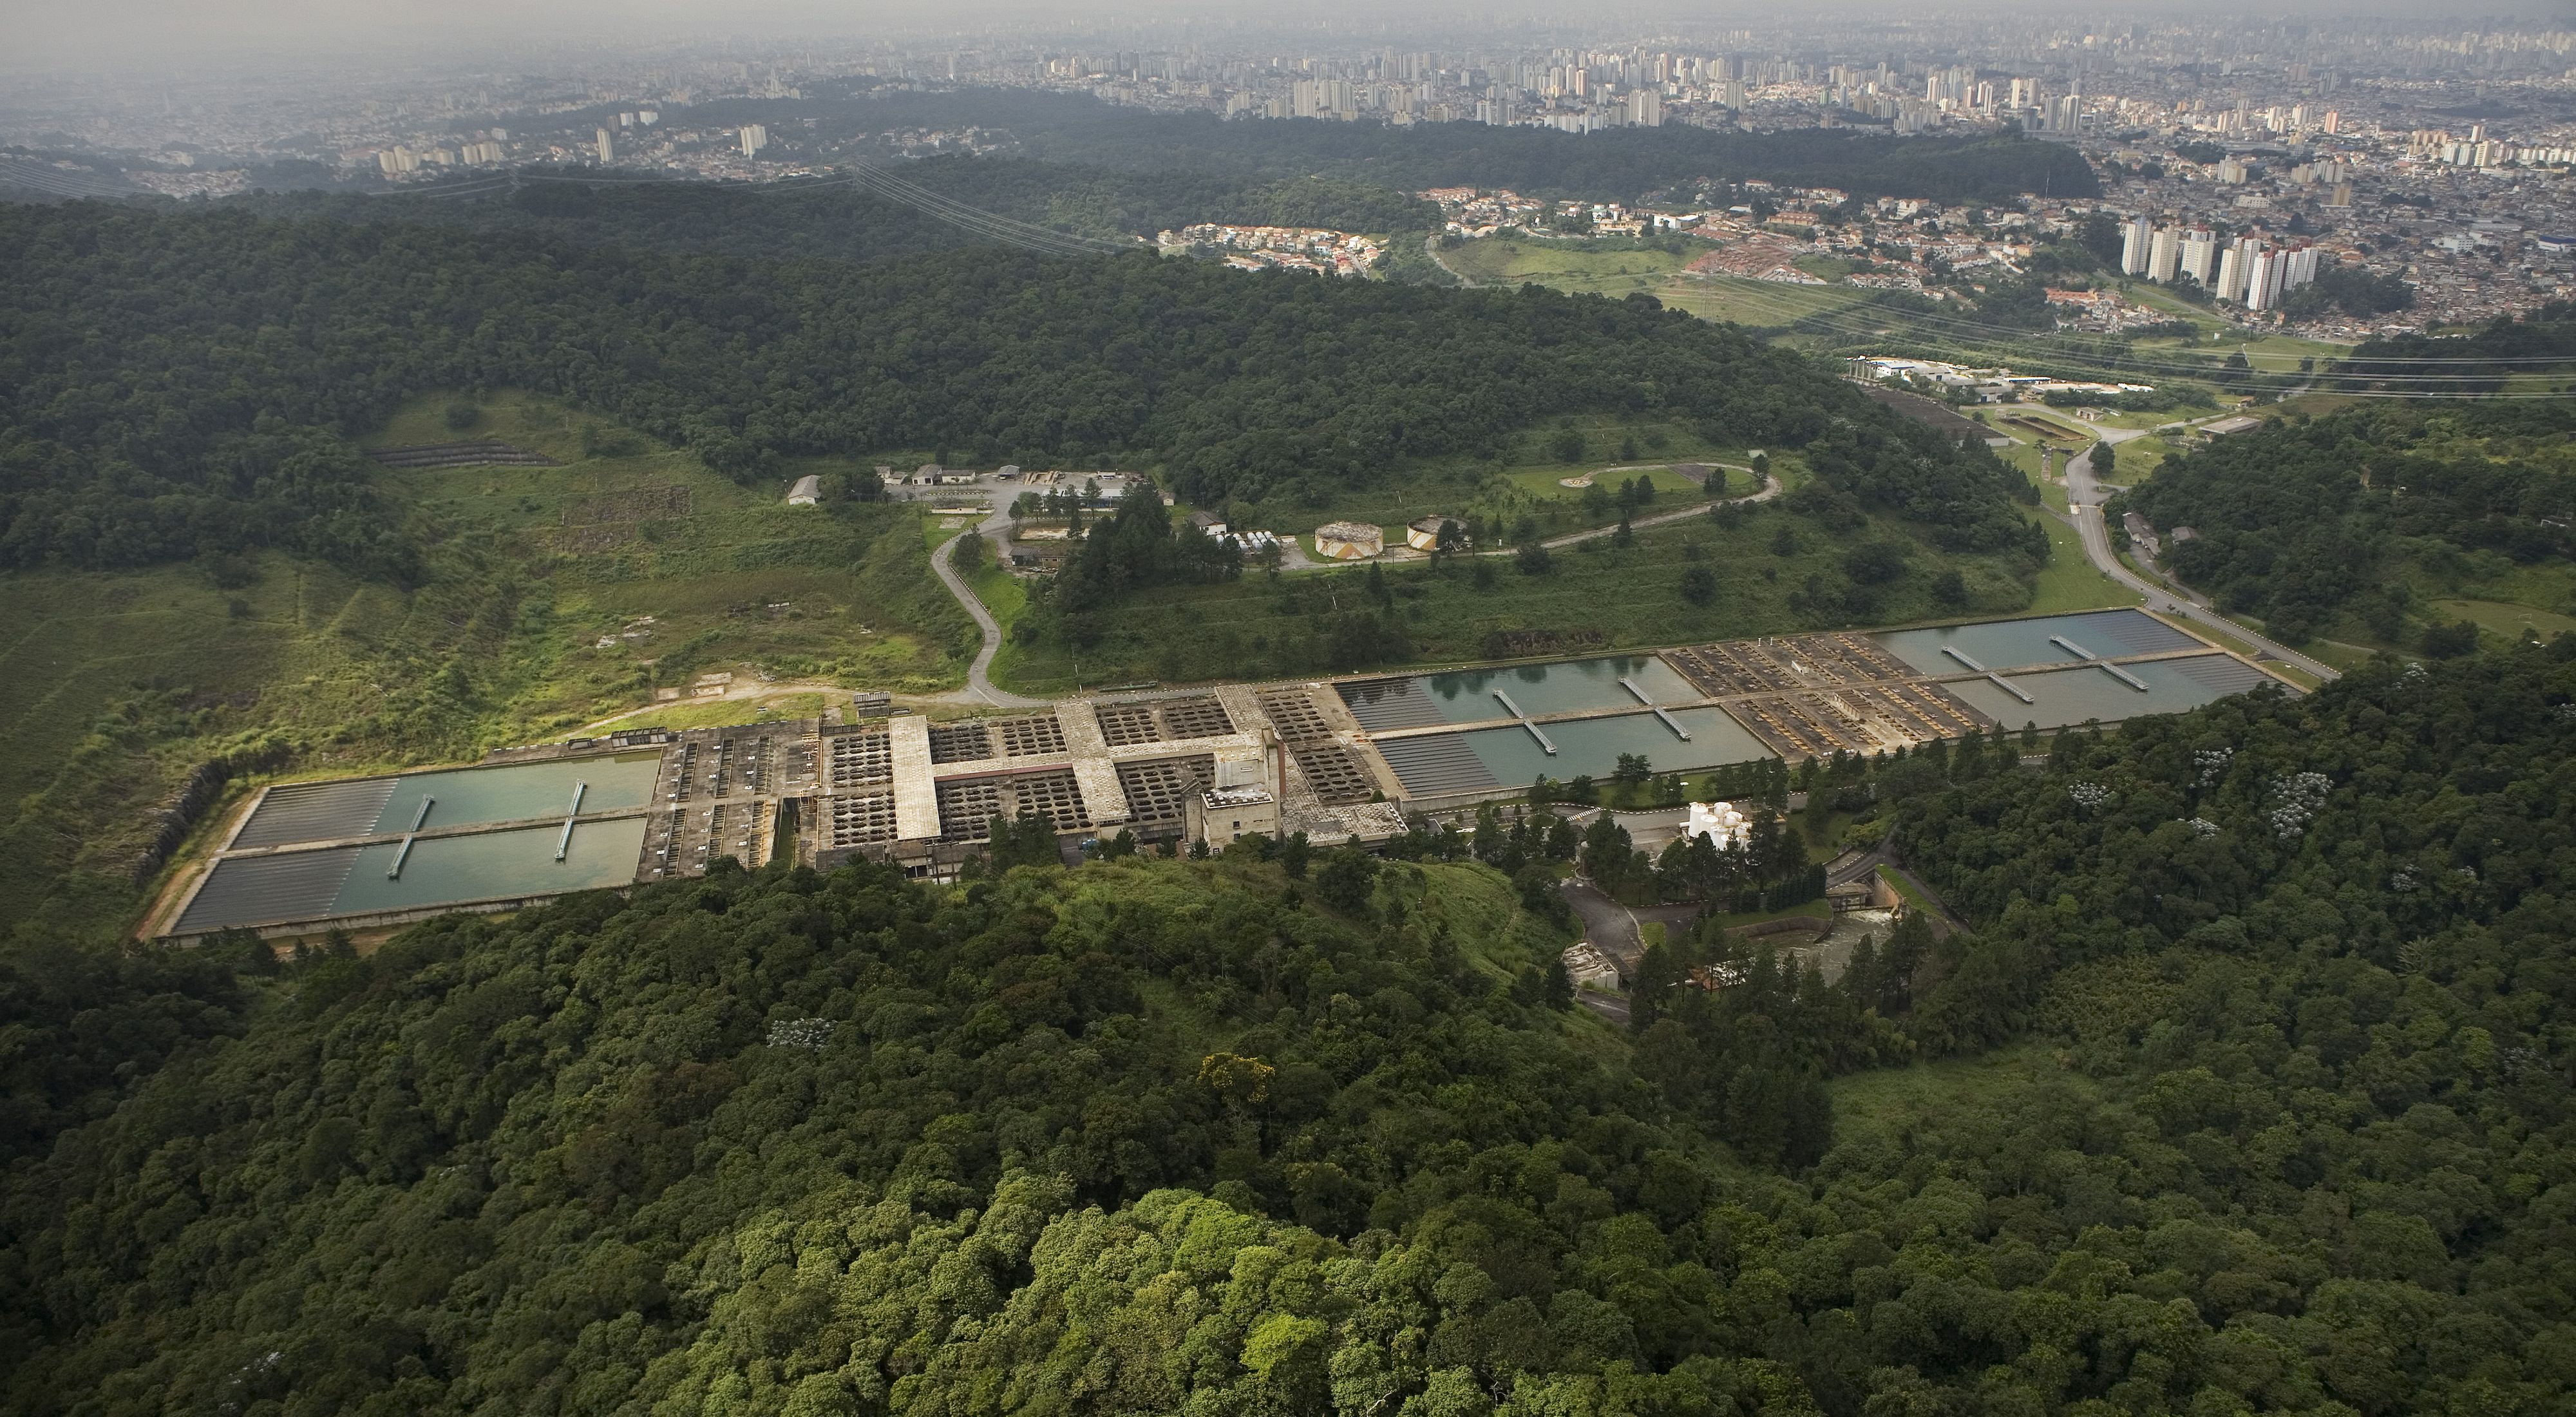 (ALL RIGHTS, ALL USES - CREDIT IS MANDATORY) Aerial view of the water purification plant, part of the Cantareira system which provides fifty percent of Sao paulo's drinking water. Some of the Sao Paulo urban area can be seen beyond the water treatment facility. PHOTO CREDIT: ©Scott Warren     